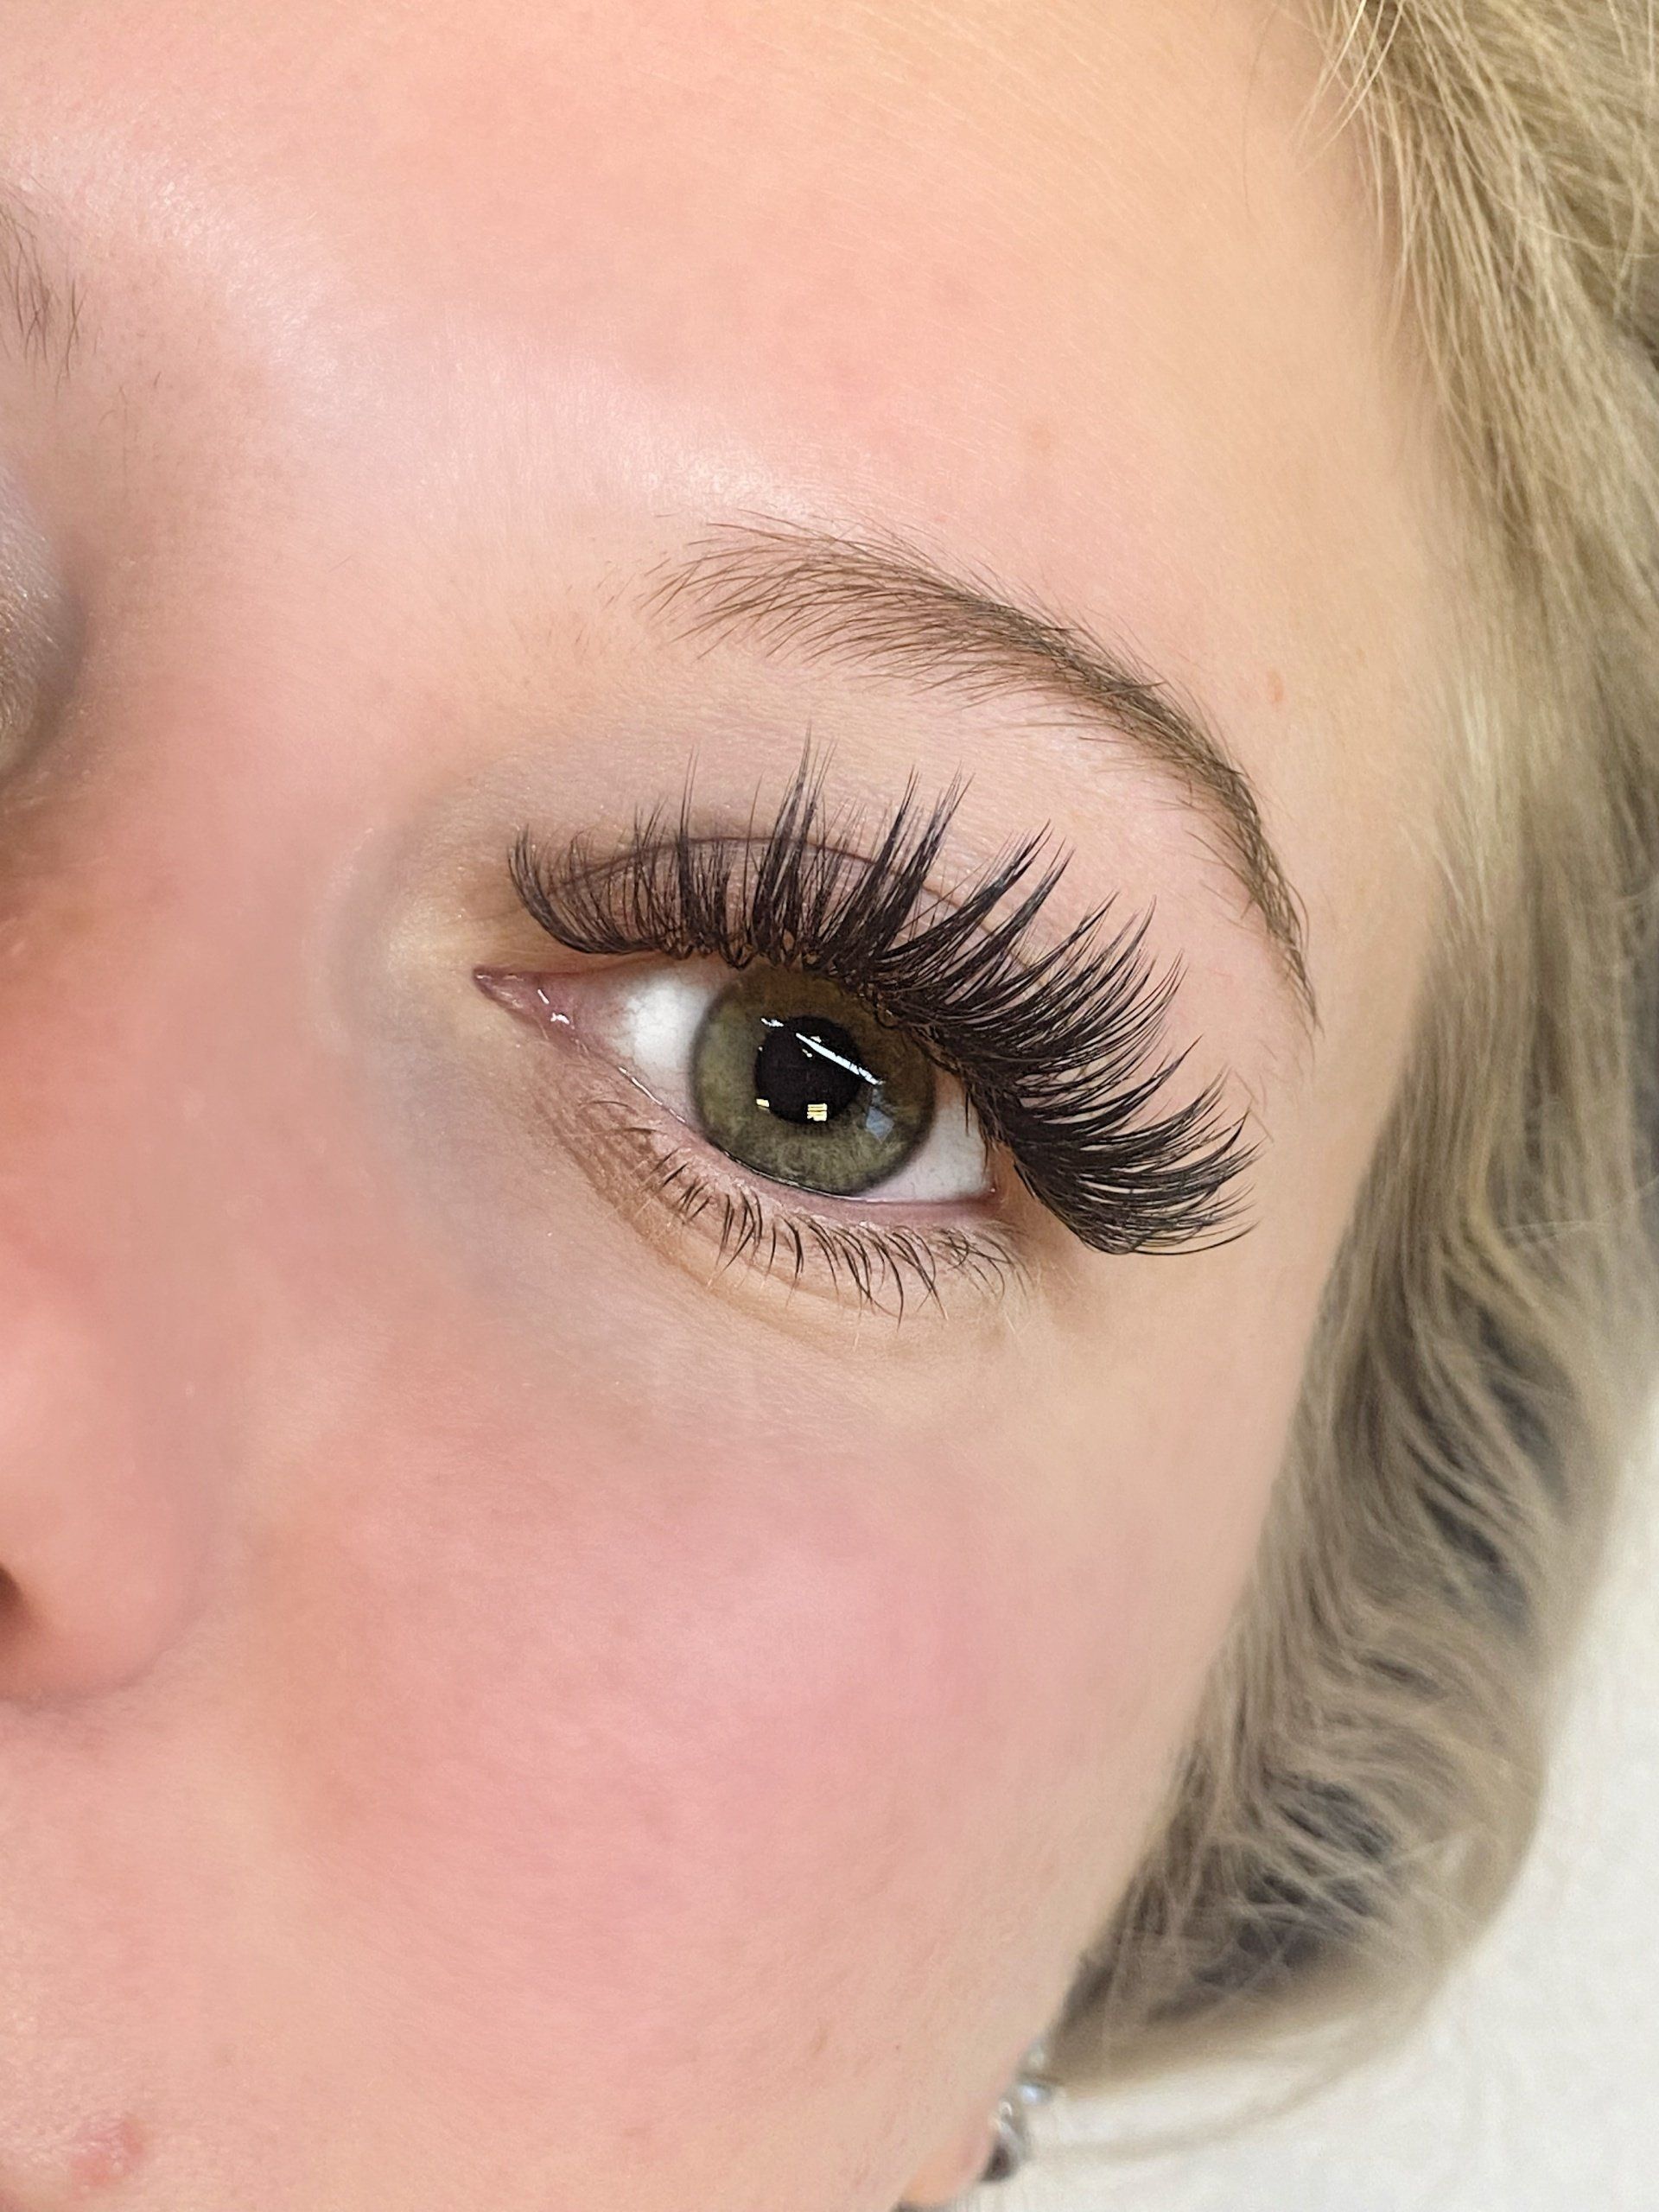 Lash Extensions-After Photo